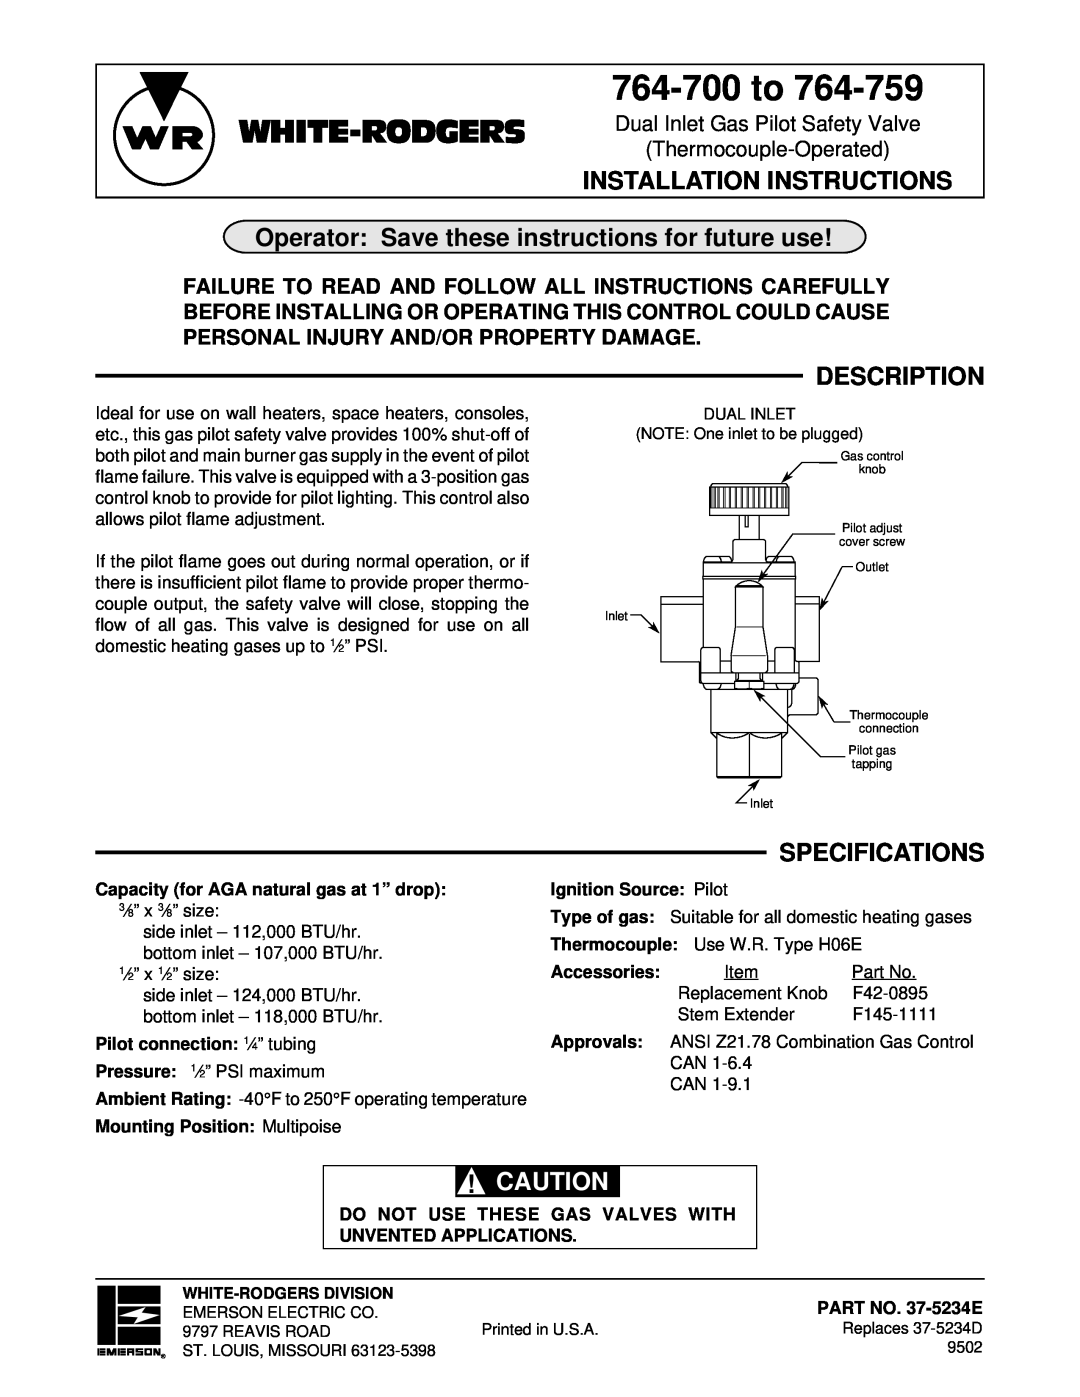 White Rodgers 37-5234E installation instructions Operator Save these instructions for future use, Description, 764-700to 